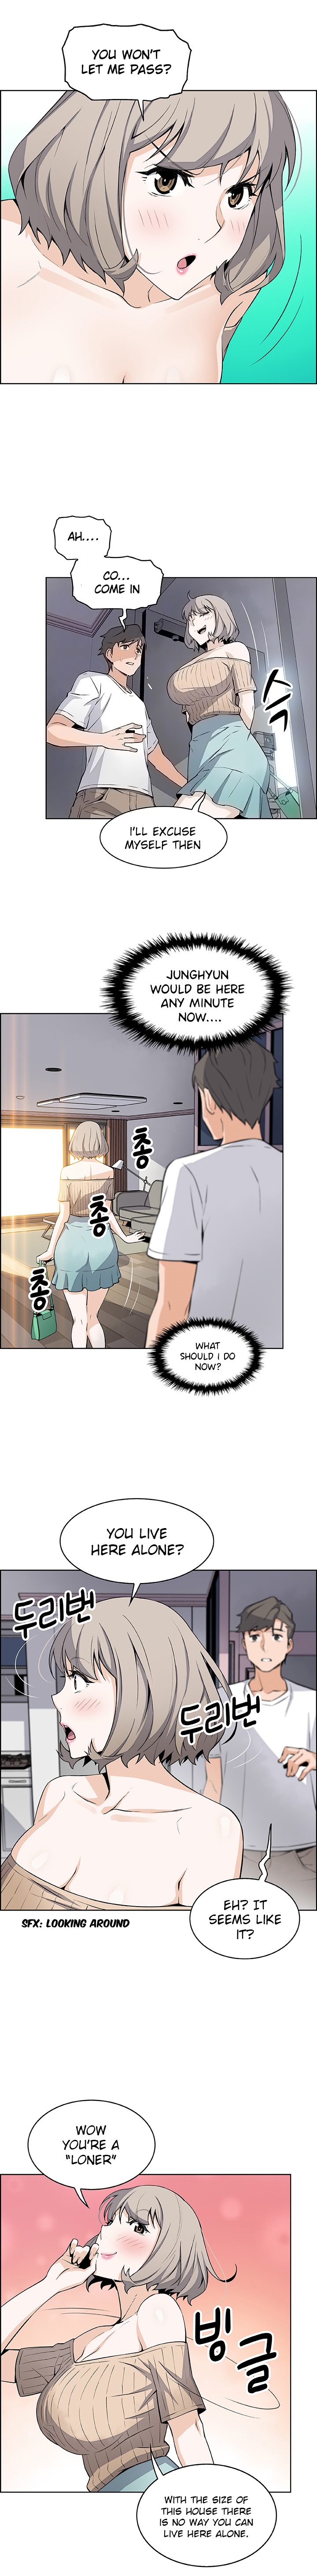 Housekeeper Manhwa - Chapter 19 Page 2